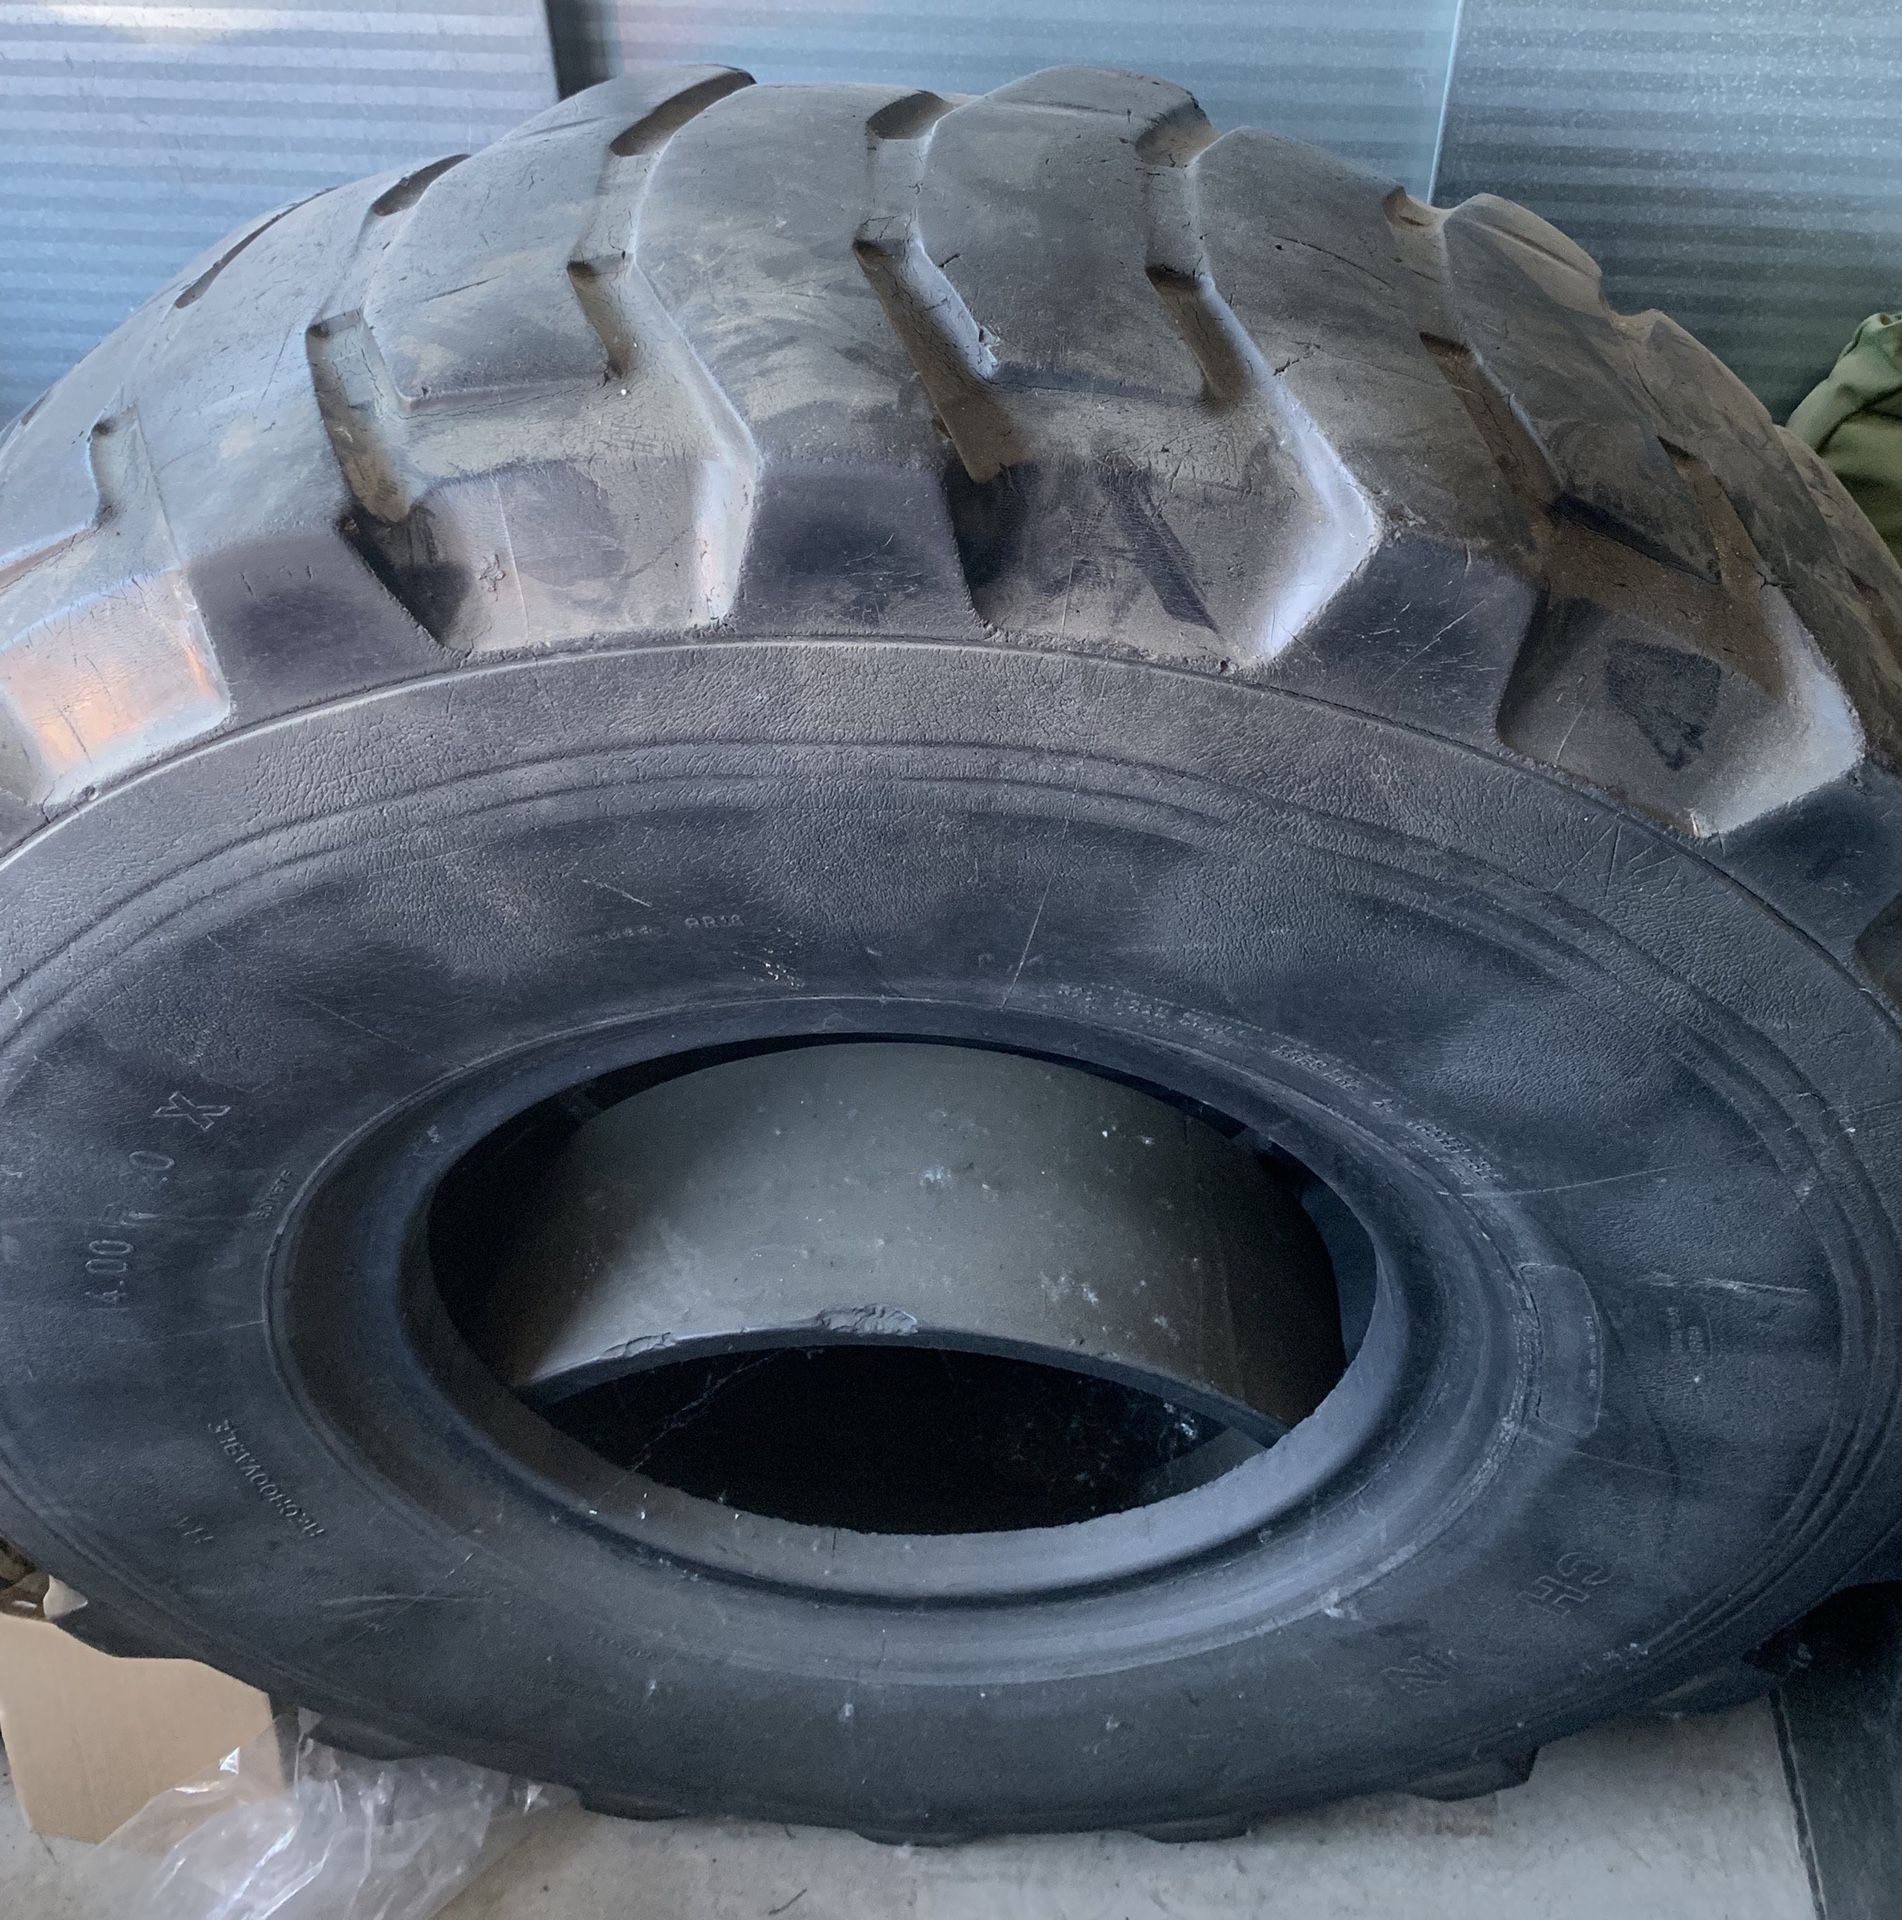 Big tire for CrossFit or any workout